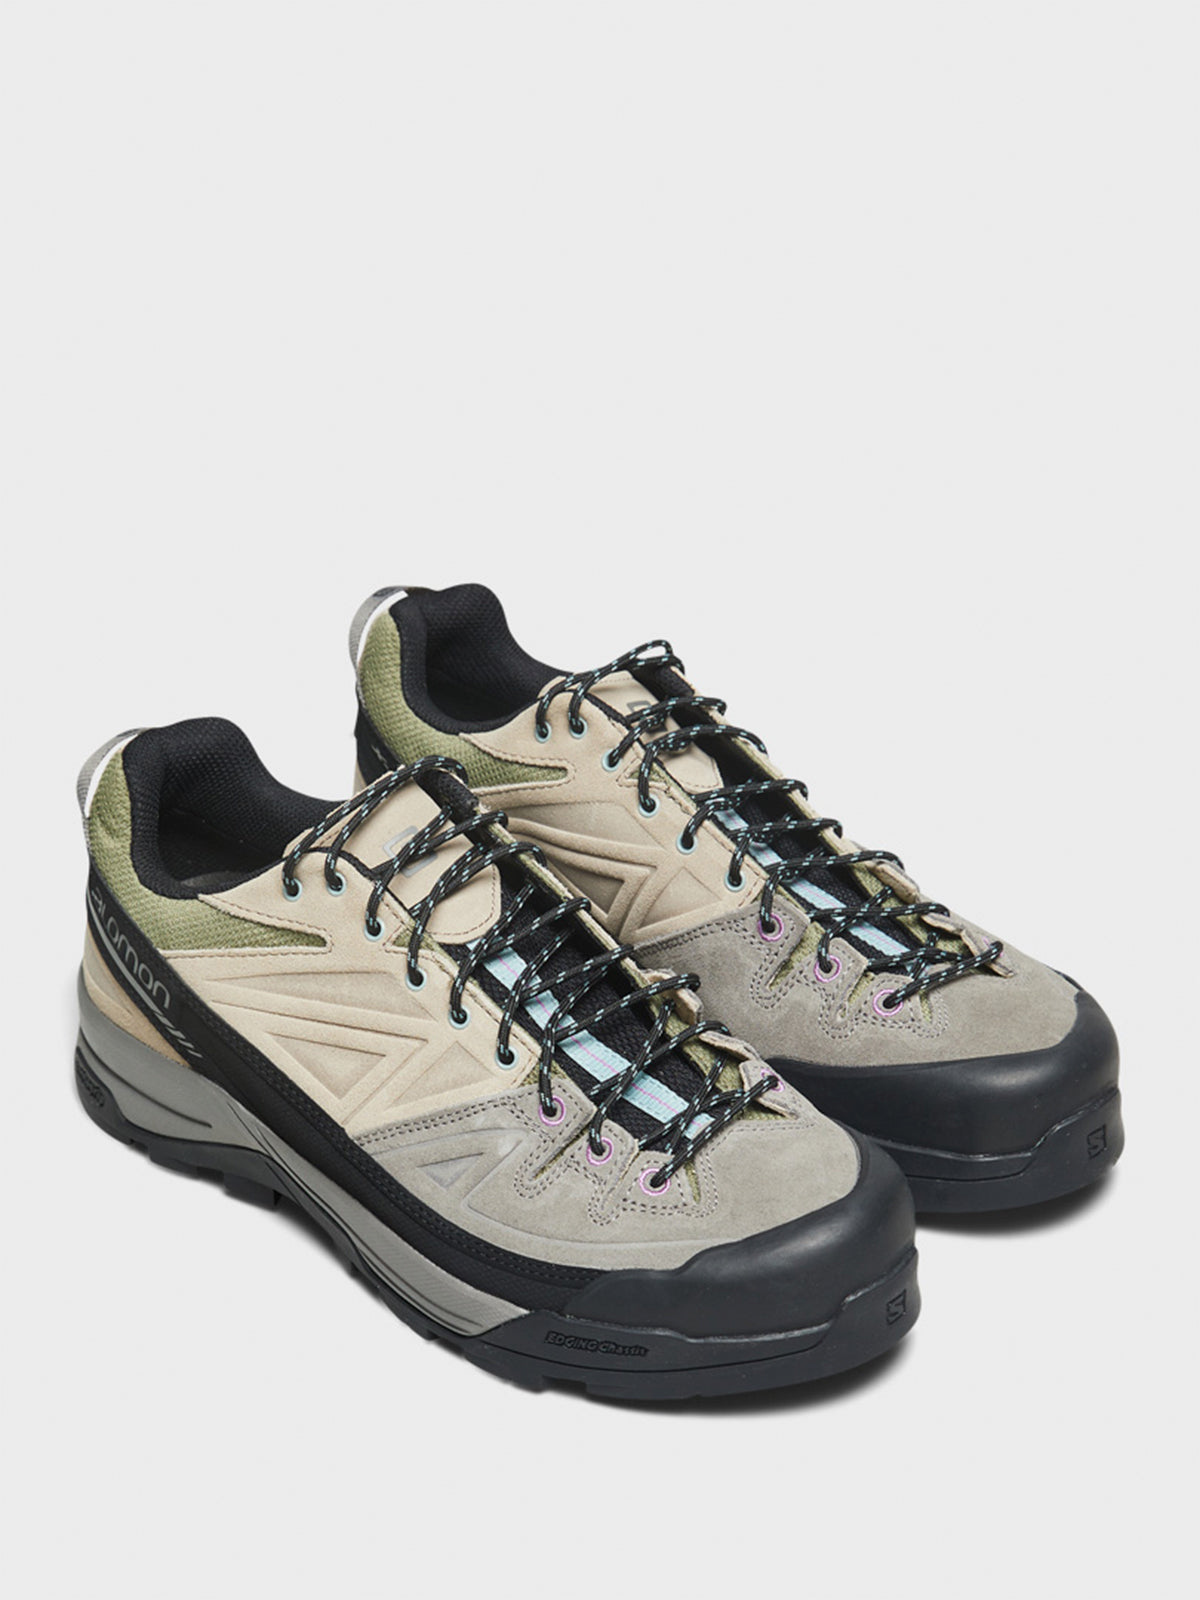 X-ALP LTR Sneakers in Khaki and Black